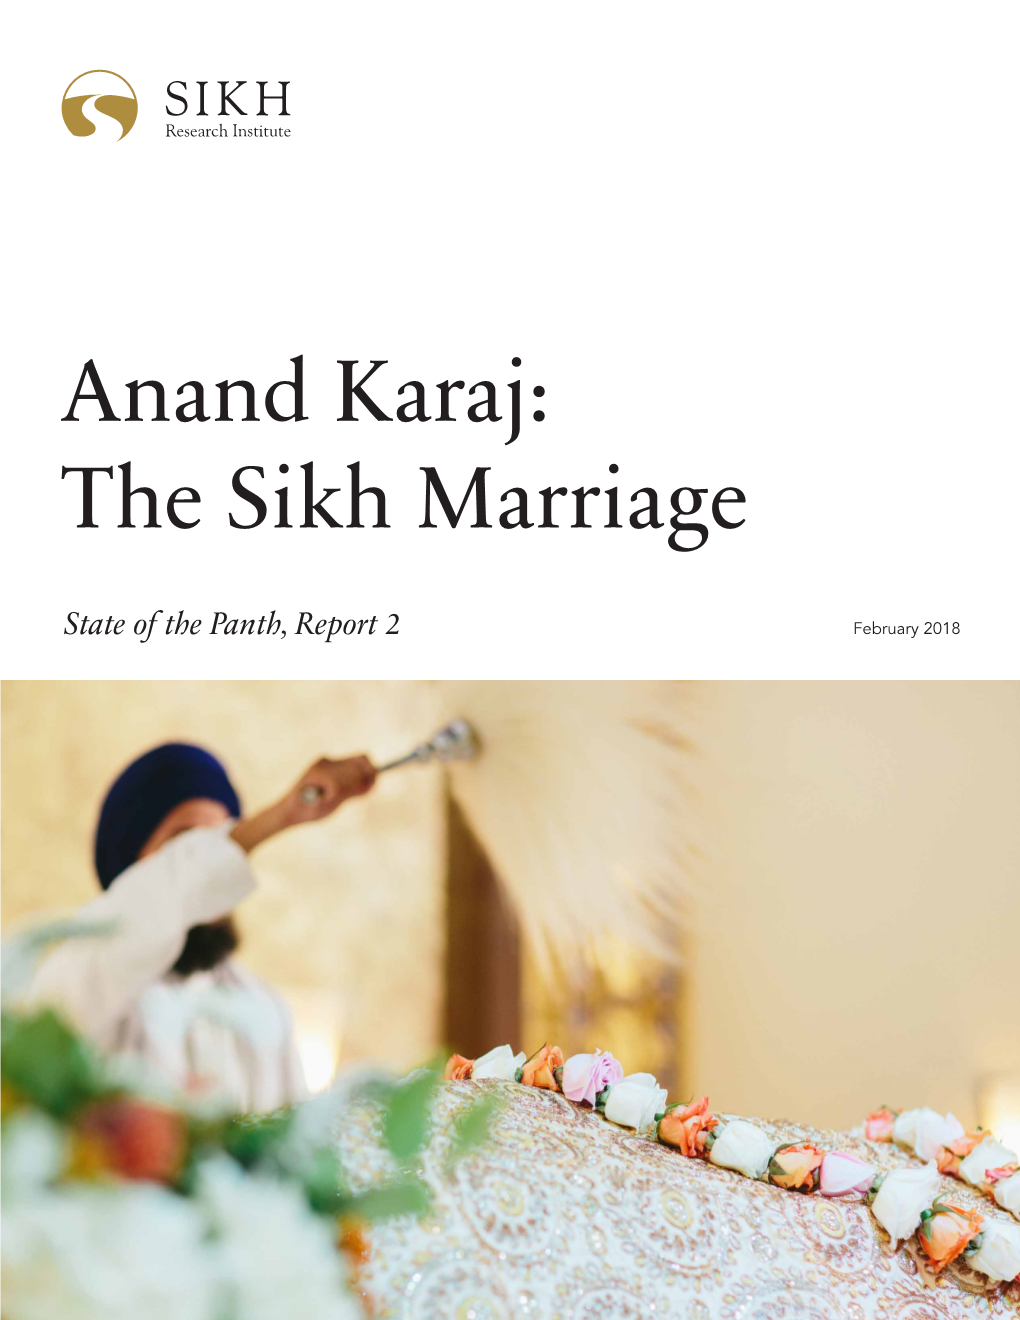 The Sikh Marriage